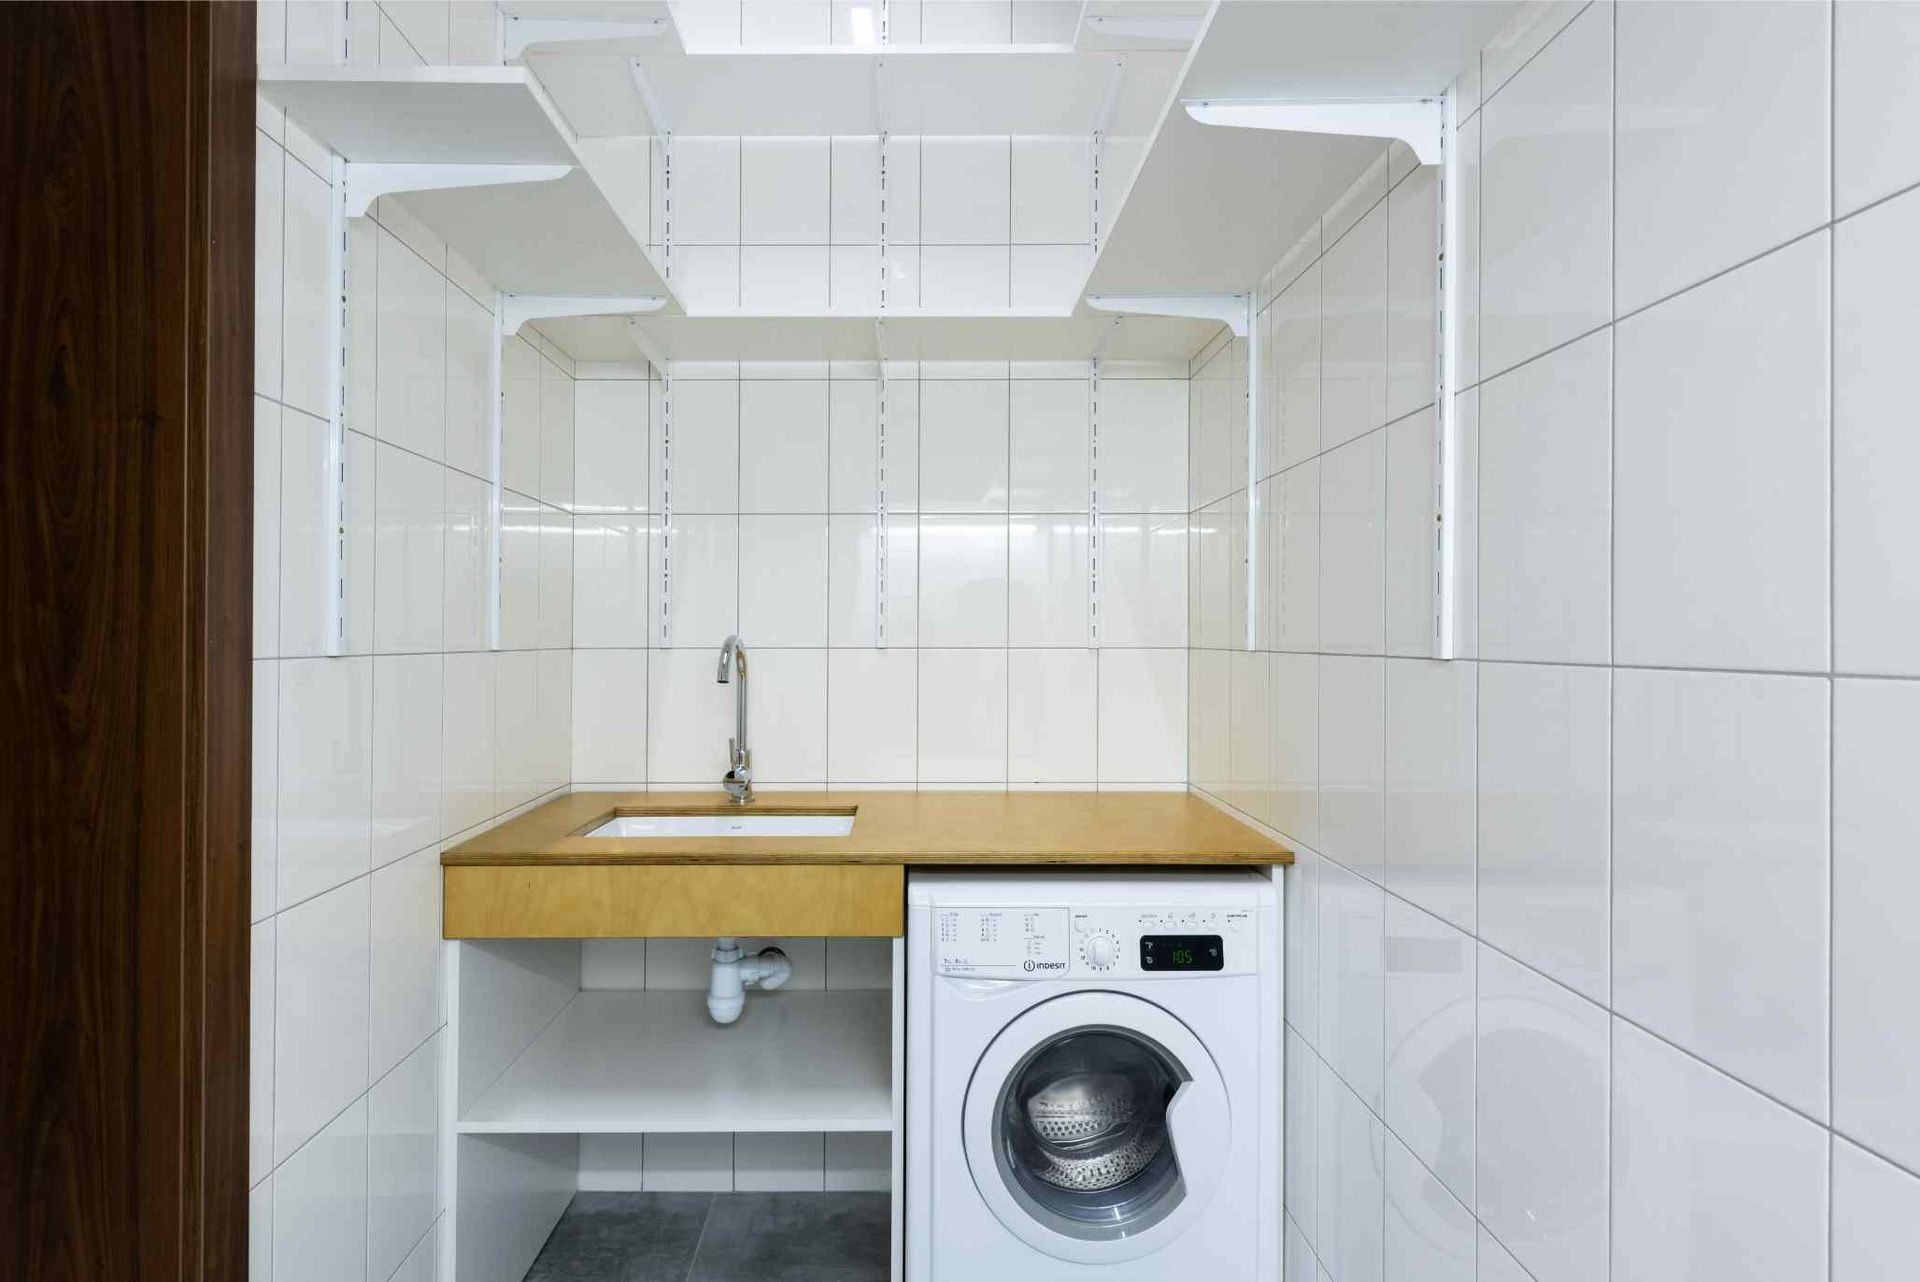 Newly deep-cleaned laundry room of a residential property in Bunbury WA.